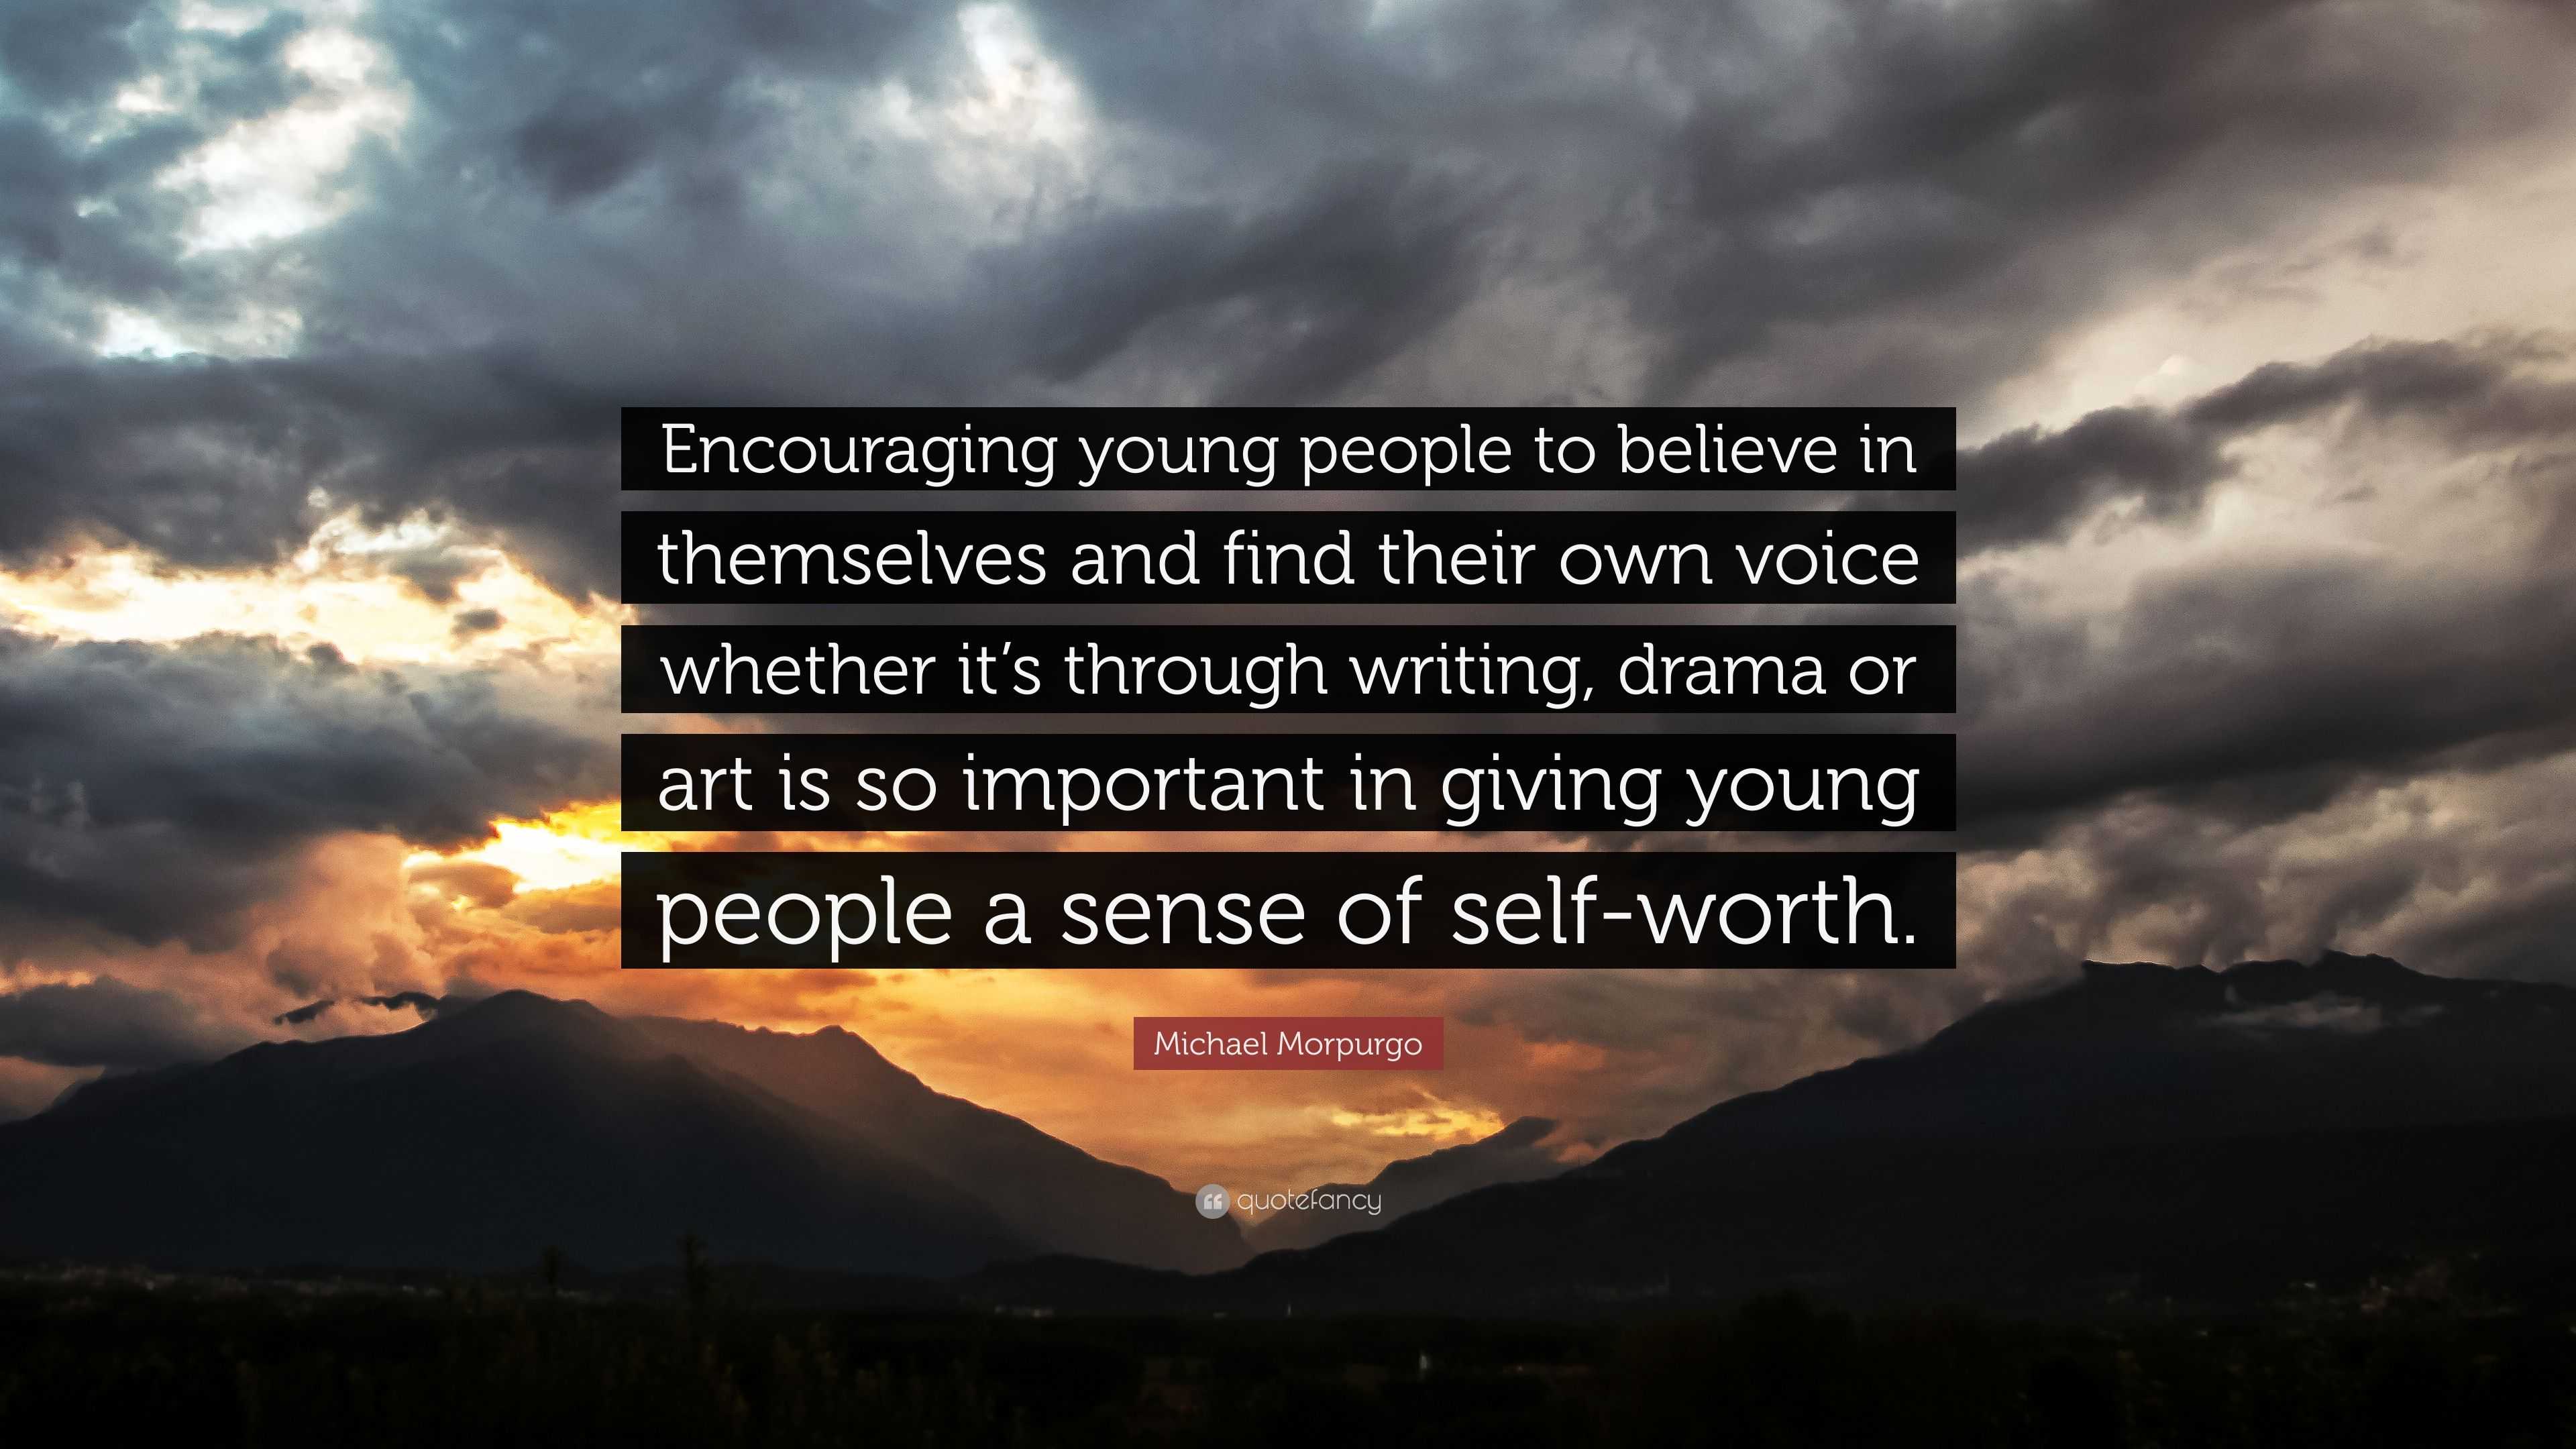 Michael Morpurgo Quote: “Encouraging young people to believe in themselves  and find their own voice whether it's through writing, drama or art is...”